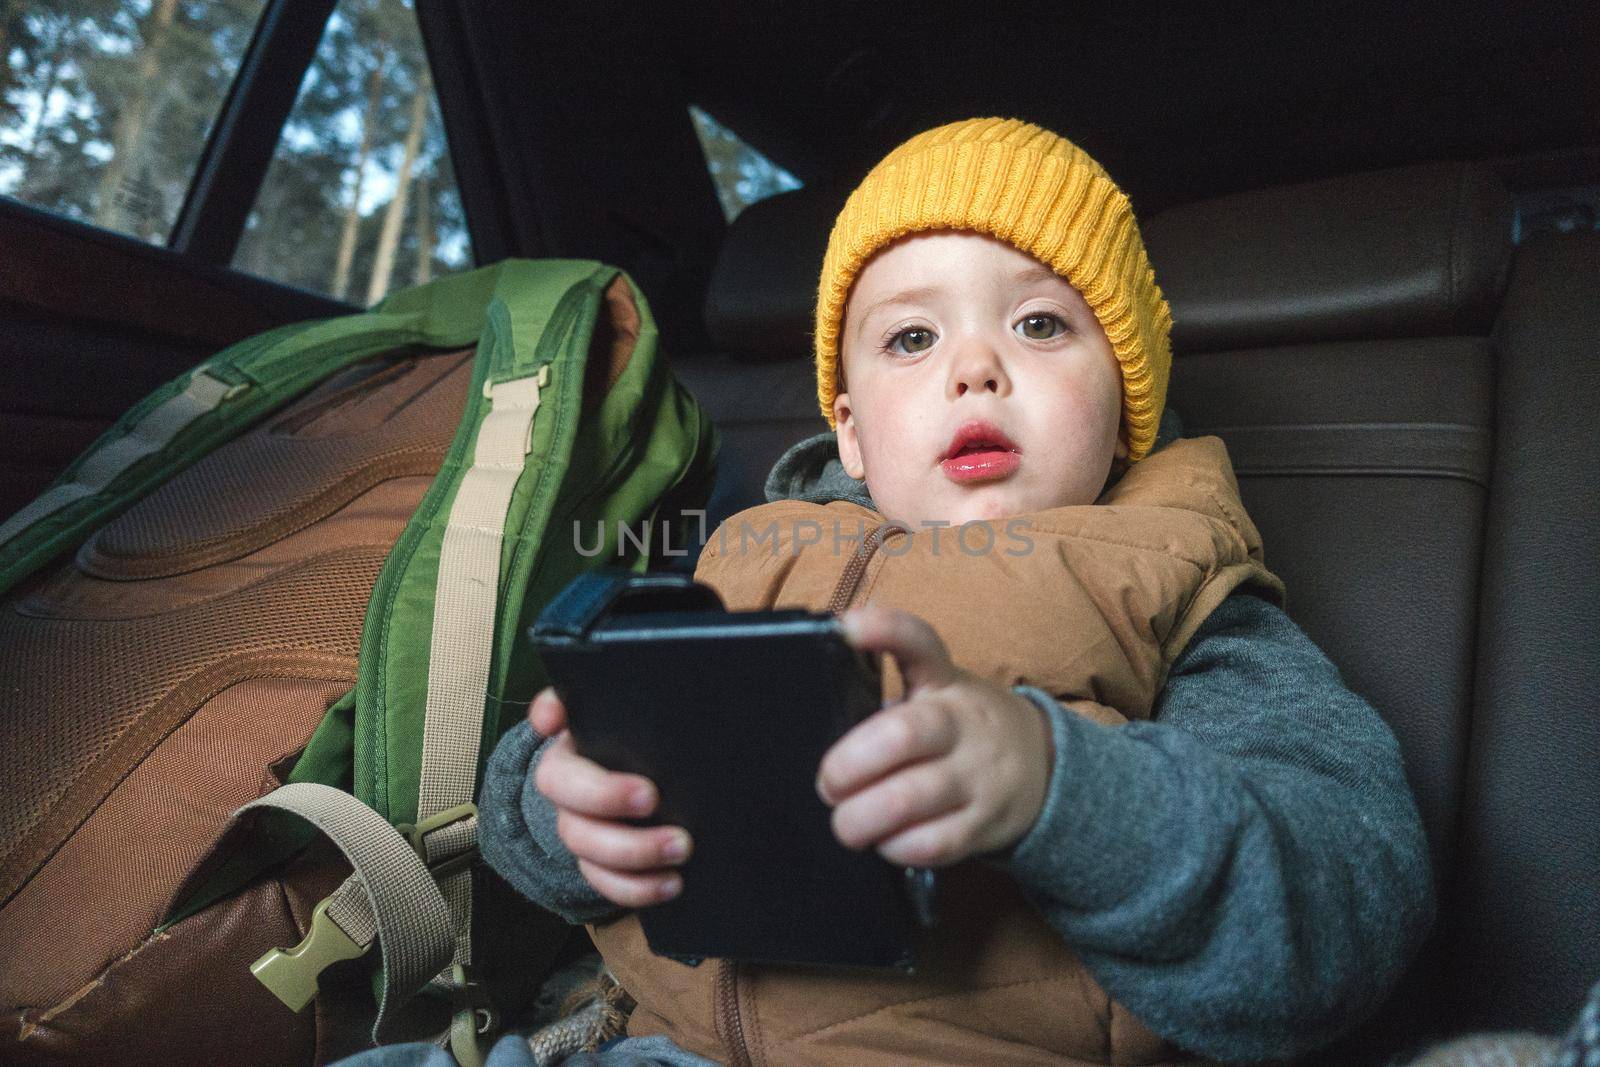 Charming toddler in outwear and hat sitting on backseat in car with device in hands looking at camera.